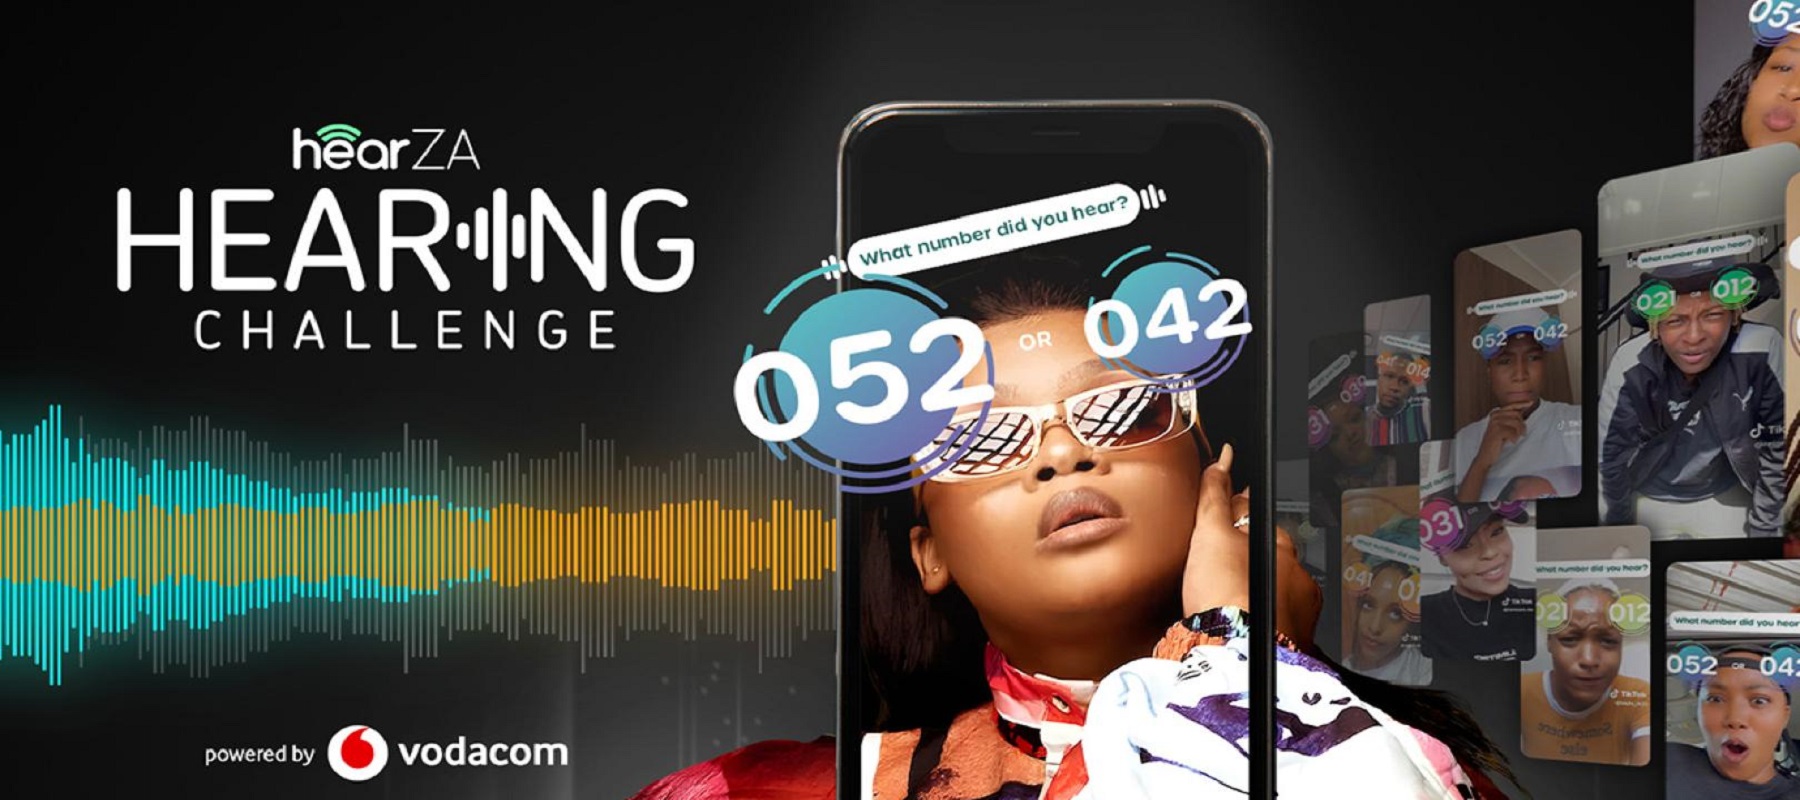 Vodacom turns a Tiktok challenge into a hearing test for youth in new campaign